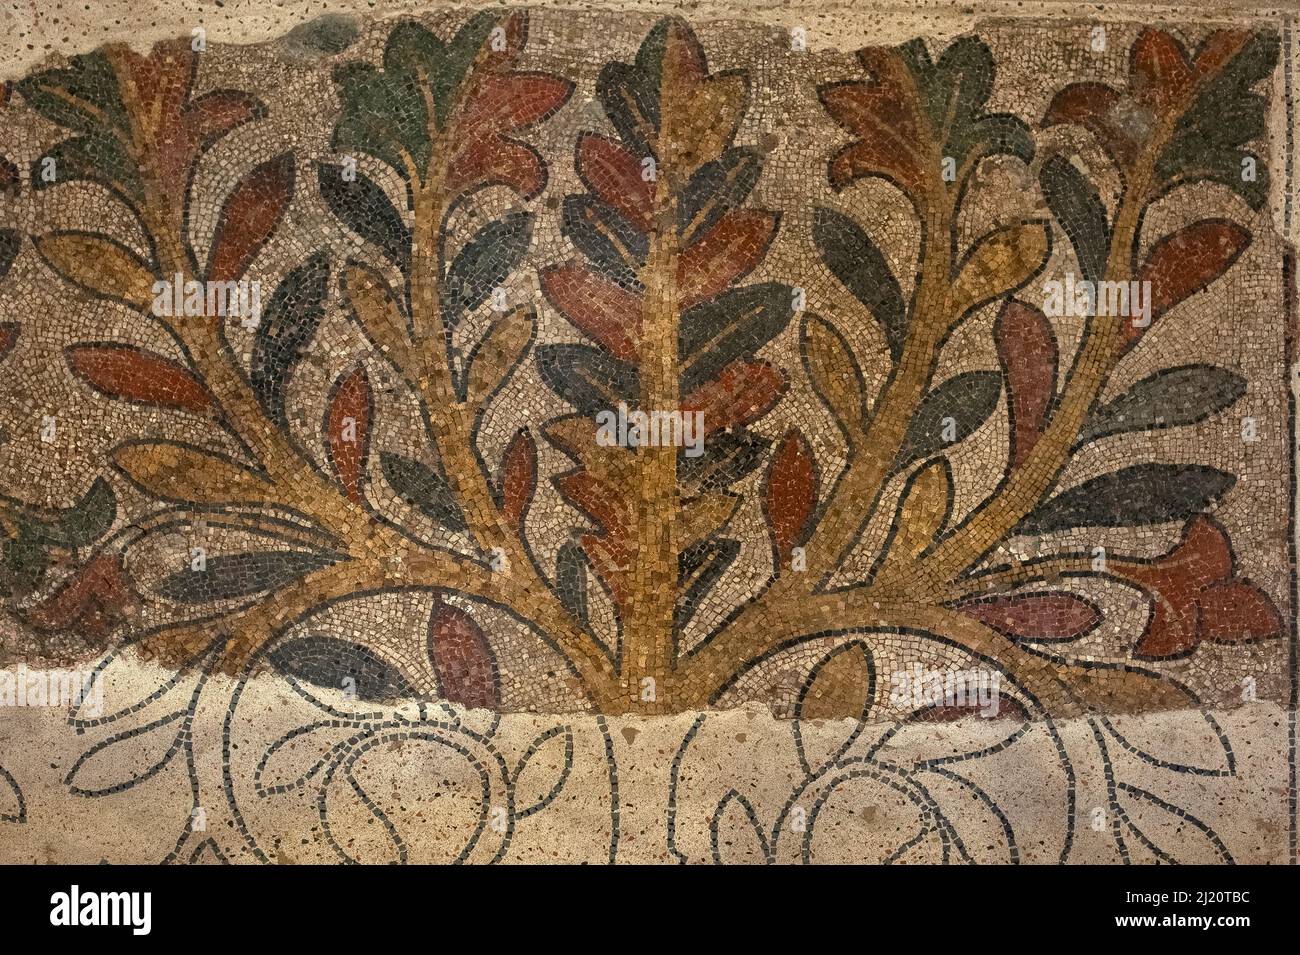 Restoration work on late 1000s / early 1100s mosaic pavement of Romanesque abbey church of Saint-Jean de Sordes at Sorde l'Abbaye, Landes, Nouvelle-Aquitaine, France. Missing parts of medieval mosaic tree with seven main branches outlined in modern cement. Stock Photo